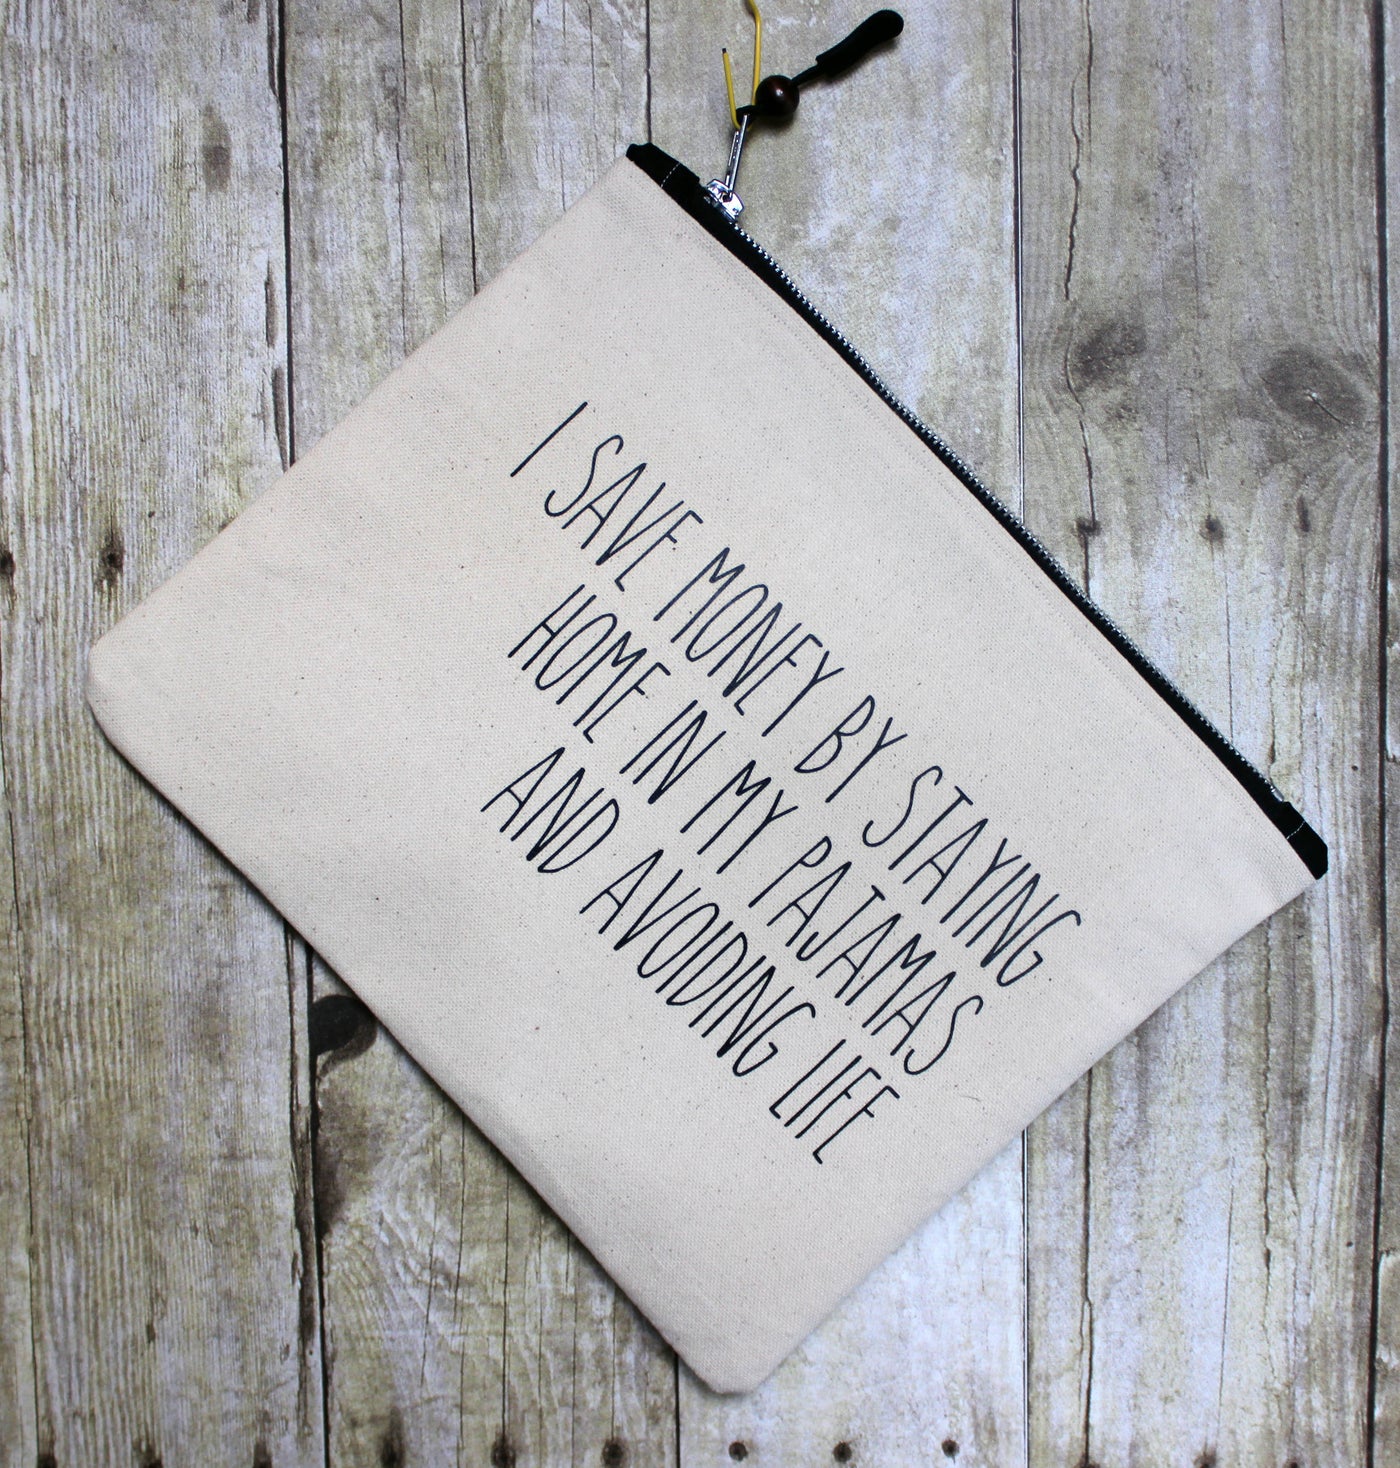 save money in your pajamas - zip money makeup bag - Pretty Clever Words